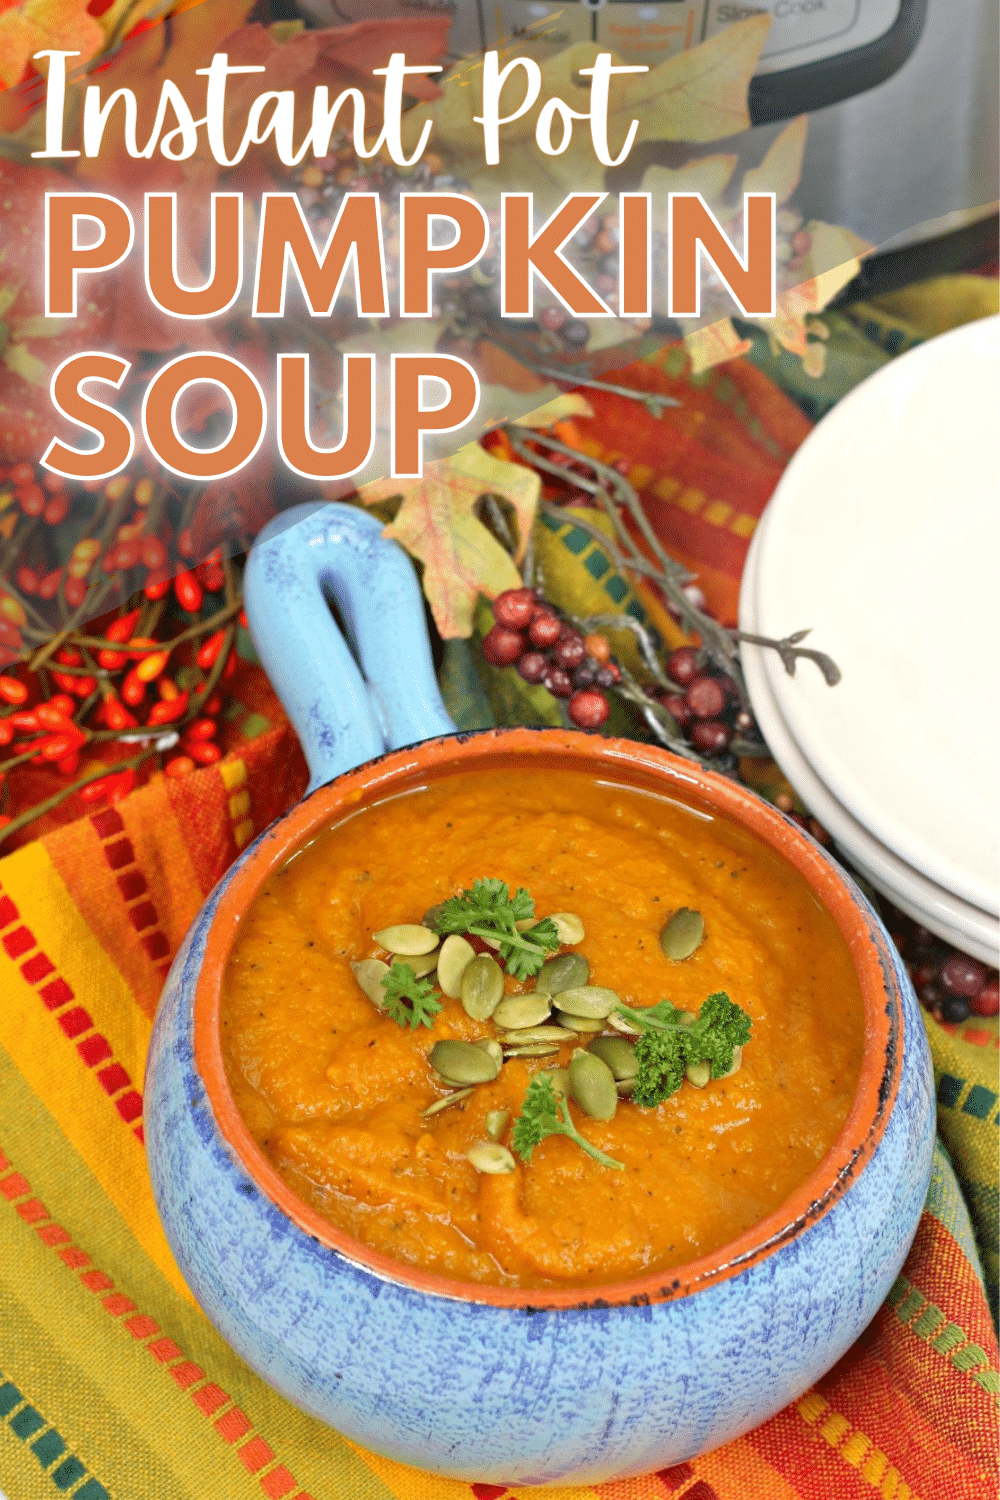 Instant Pot Pumpkin Soup is so simple to make, and is bursting with delicious flavor. This creamy soup is perfect for a chilly fall day. #instantpot #pressurecooker #fall #pumpkin #soup #recipe via @wondermomwannab